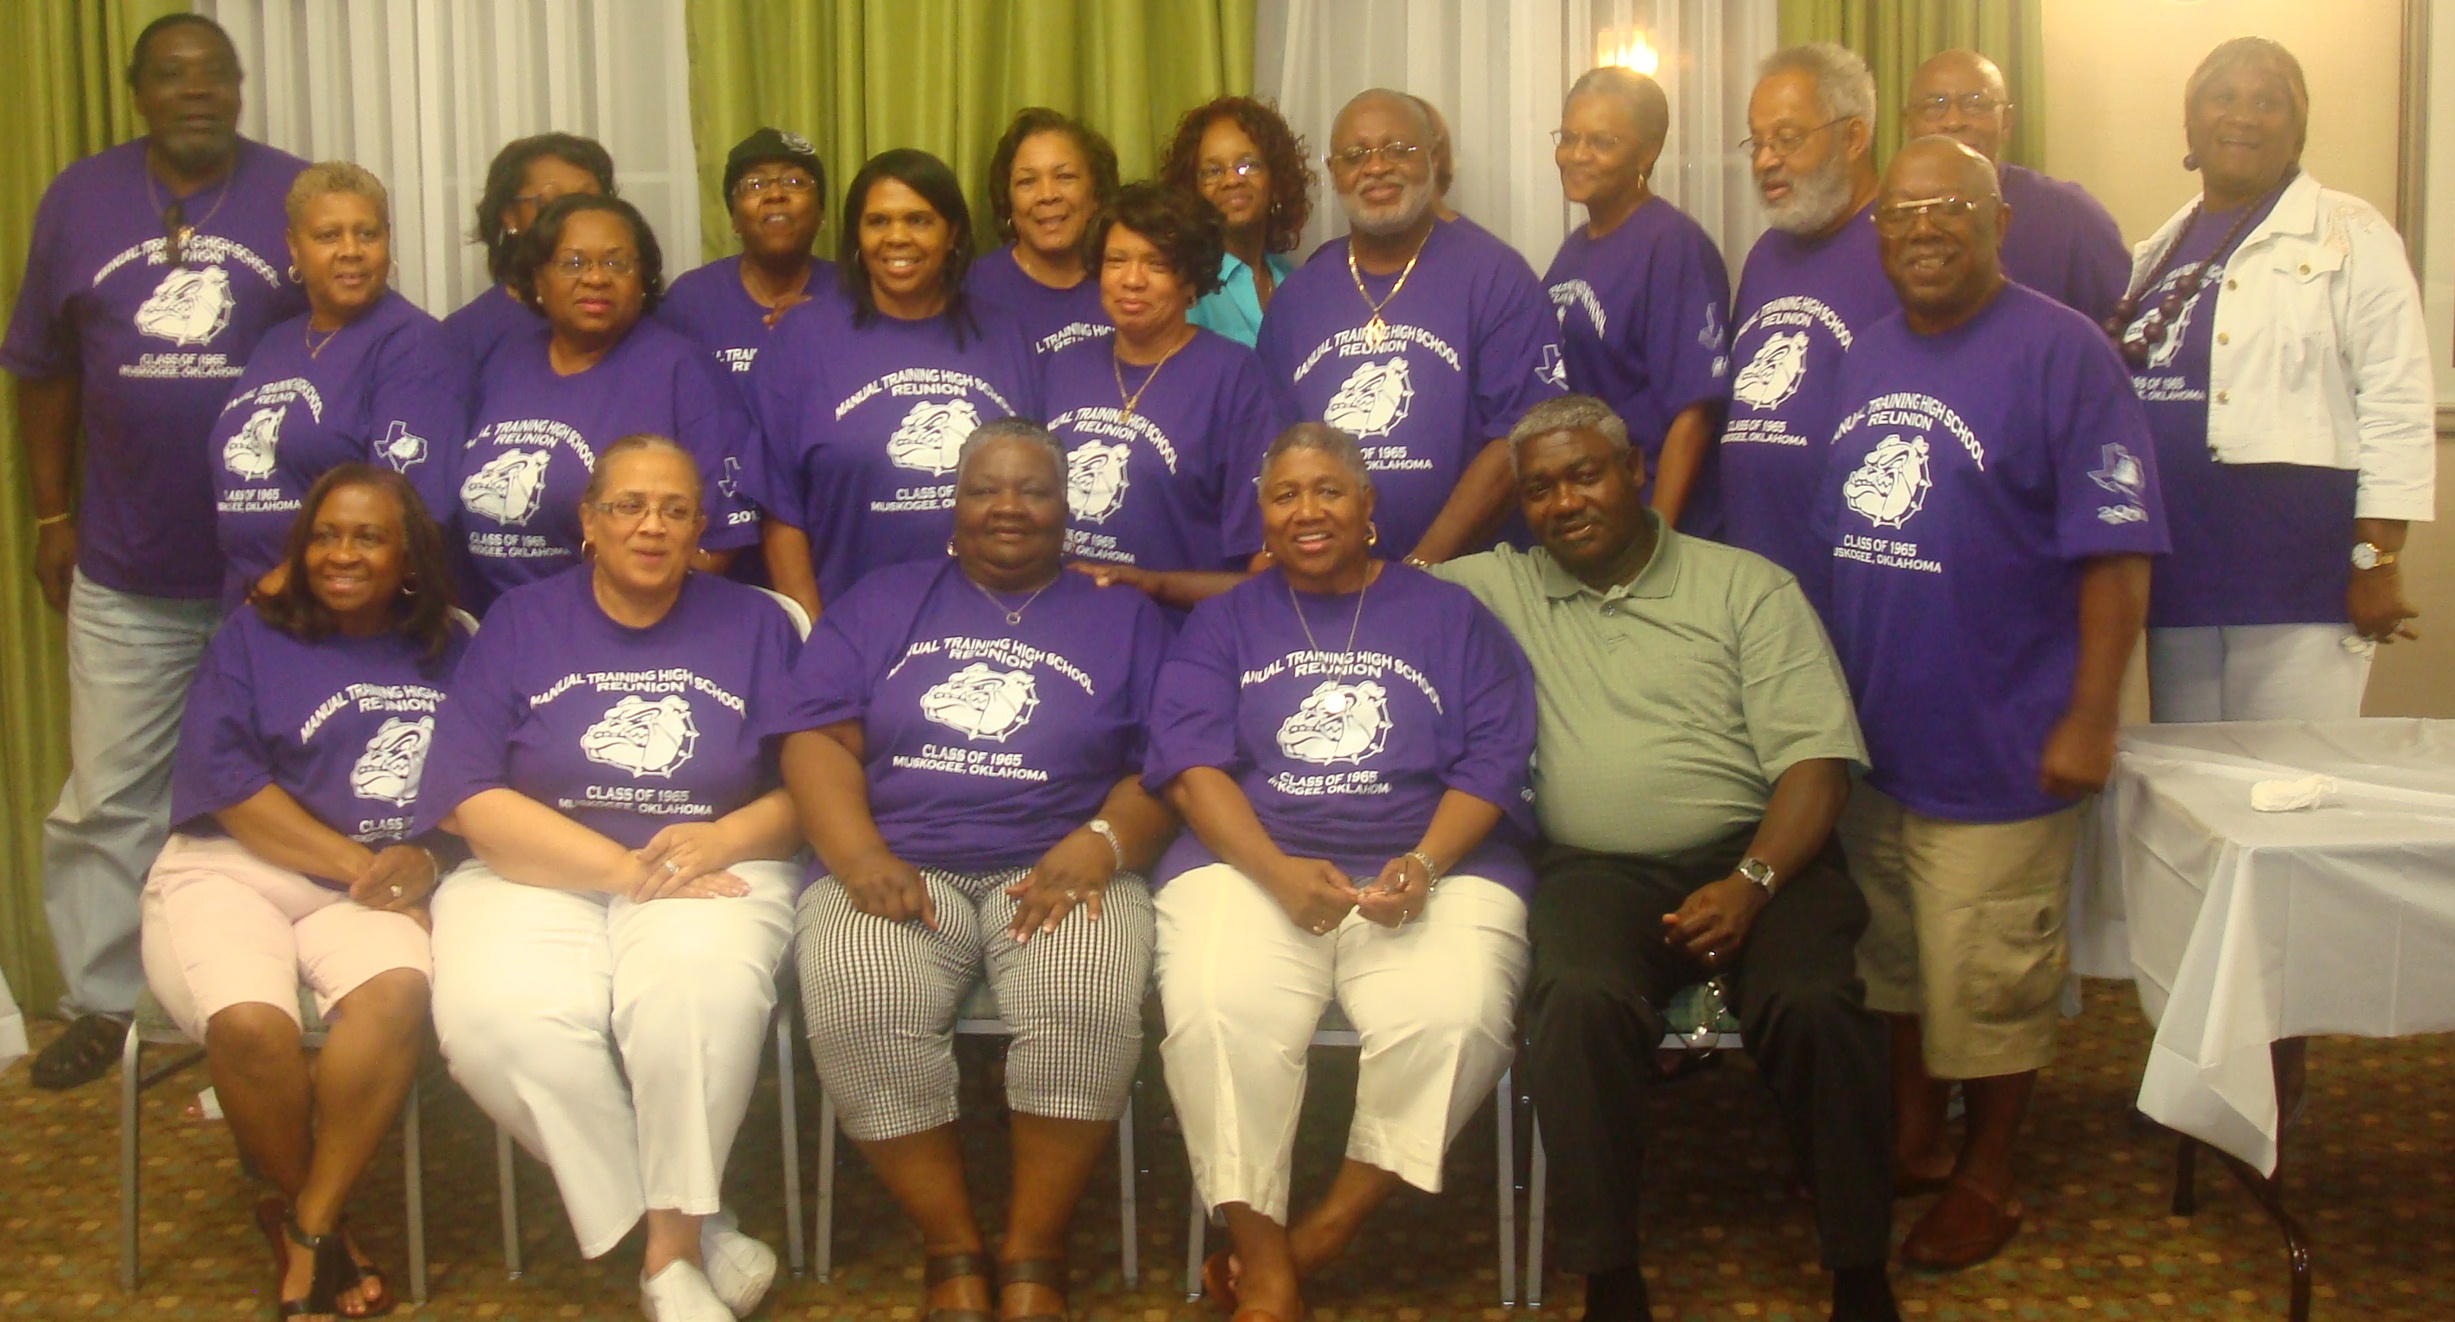 Sitting Left to Right: Joice Rivers, Marva Elliott, Frankye Sourie, Carolyn McFrazier, Porter Briggs, First Standing Left to Right: Joyce Chairs, Collotta Gray, Arthalia Wilkerson, Elvertta Wells, William Gray, Bythelda Roberts,(between both rows) David R